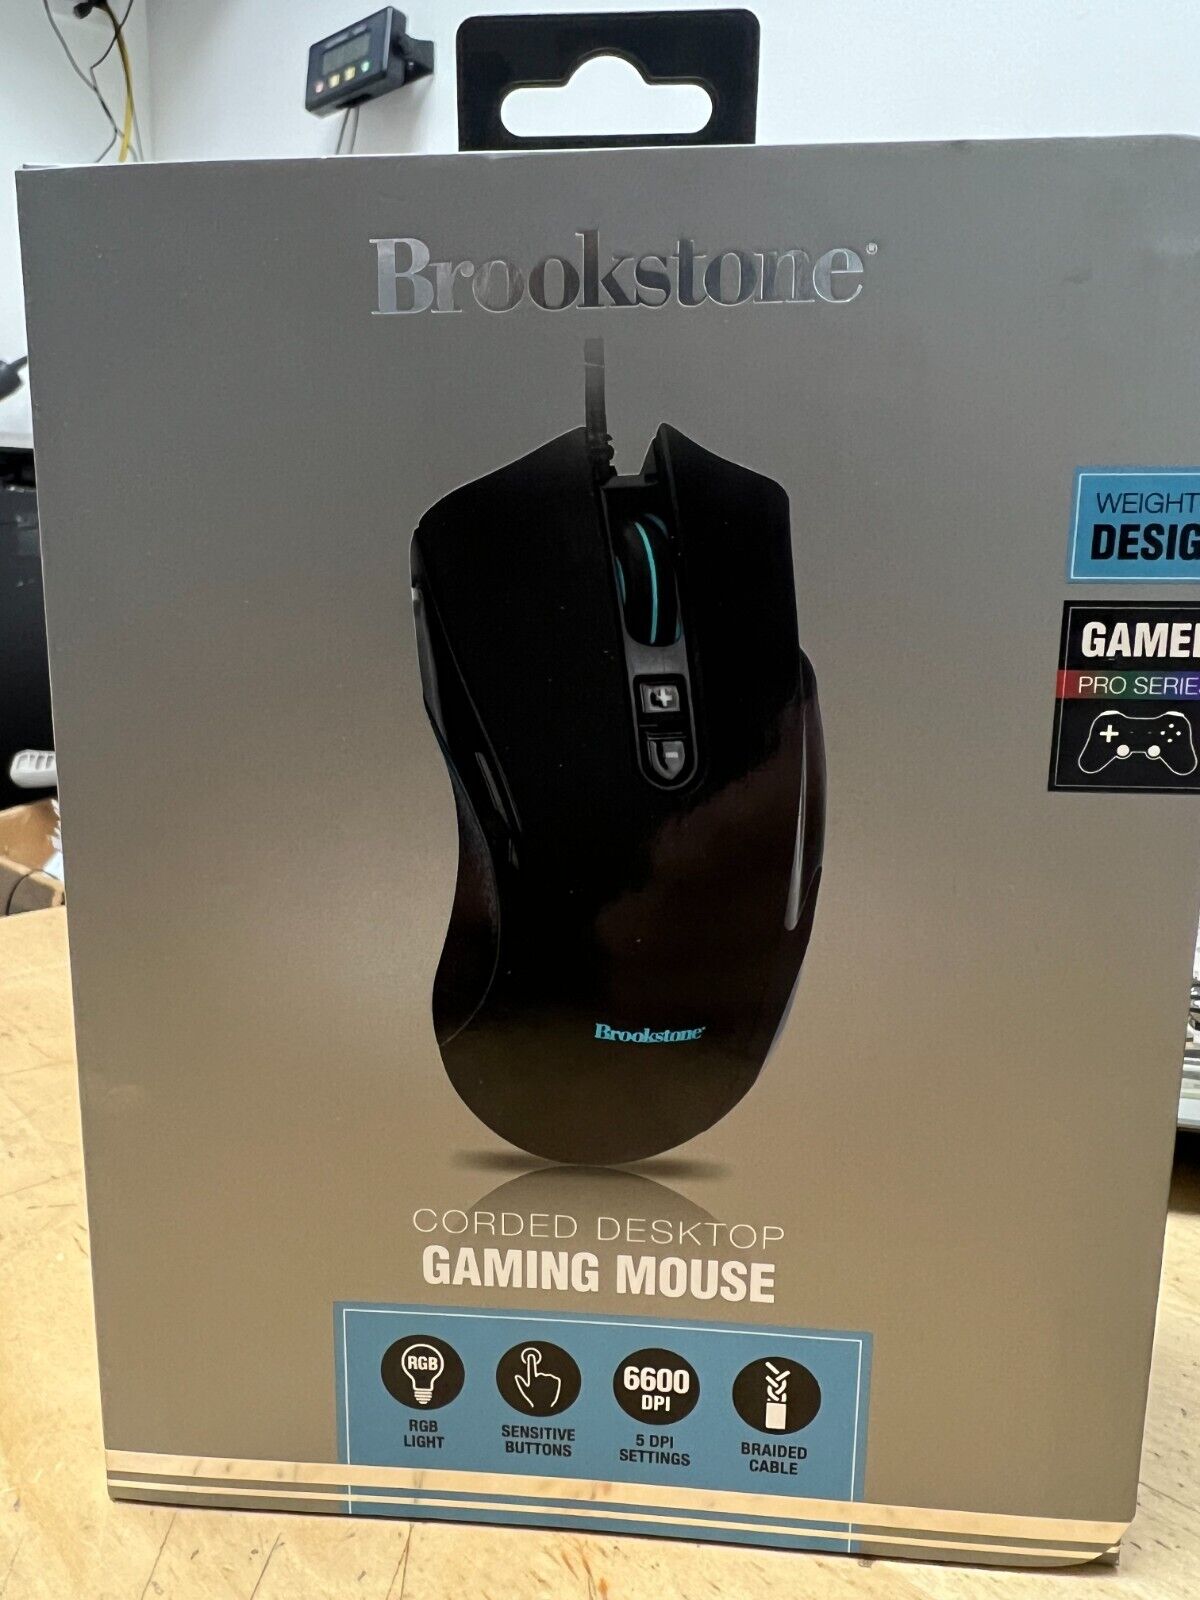 Brookstone Corded Gaming Mouse BRGM1000B